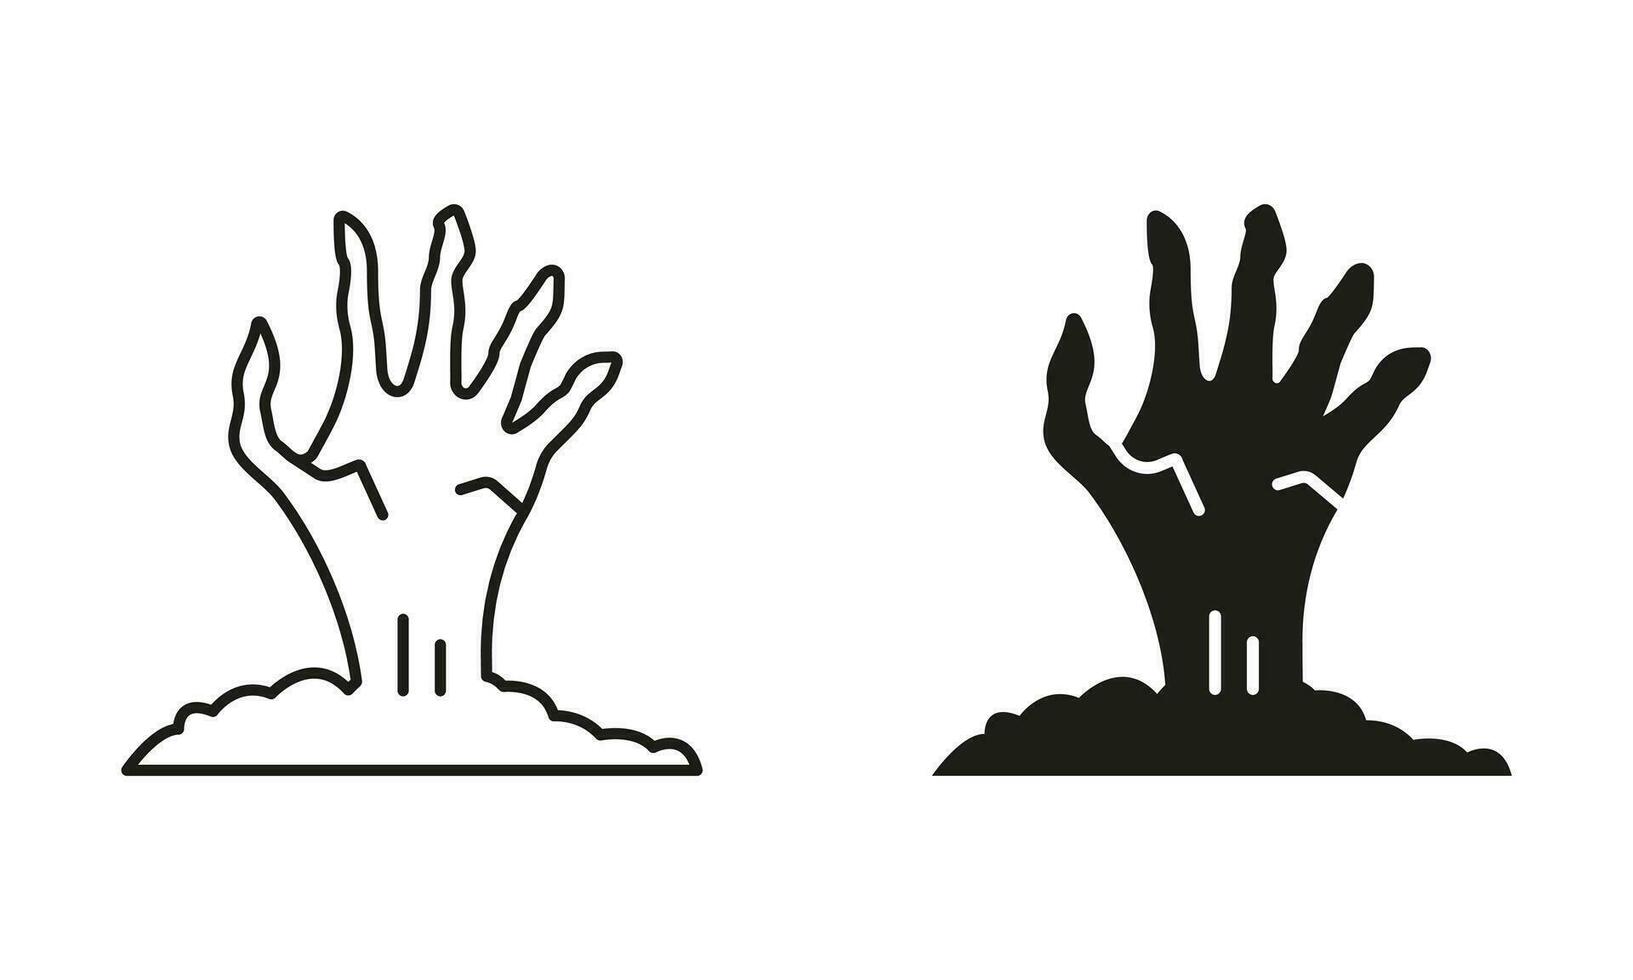 Dead Man Hand Sticking Out Ground Line and Silhouette Black Icon Set. Zombies Hand Halloween Decorations Pictogram. Scary Monsters Bony Arm Symbol Collection. Isolated Vector Illustration.